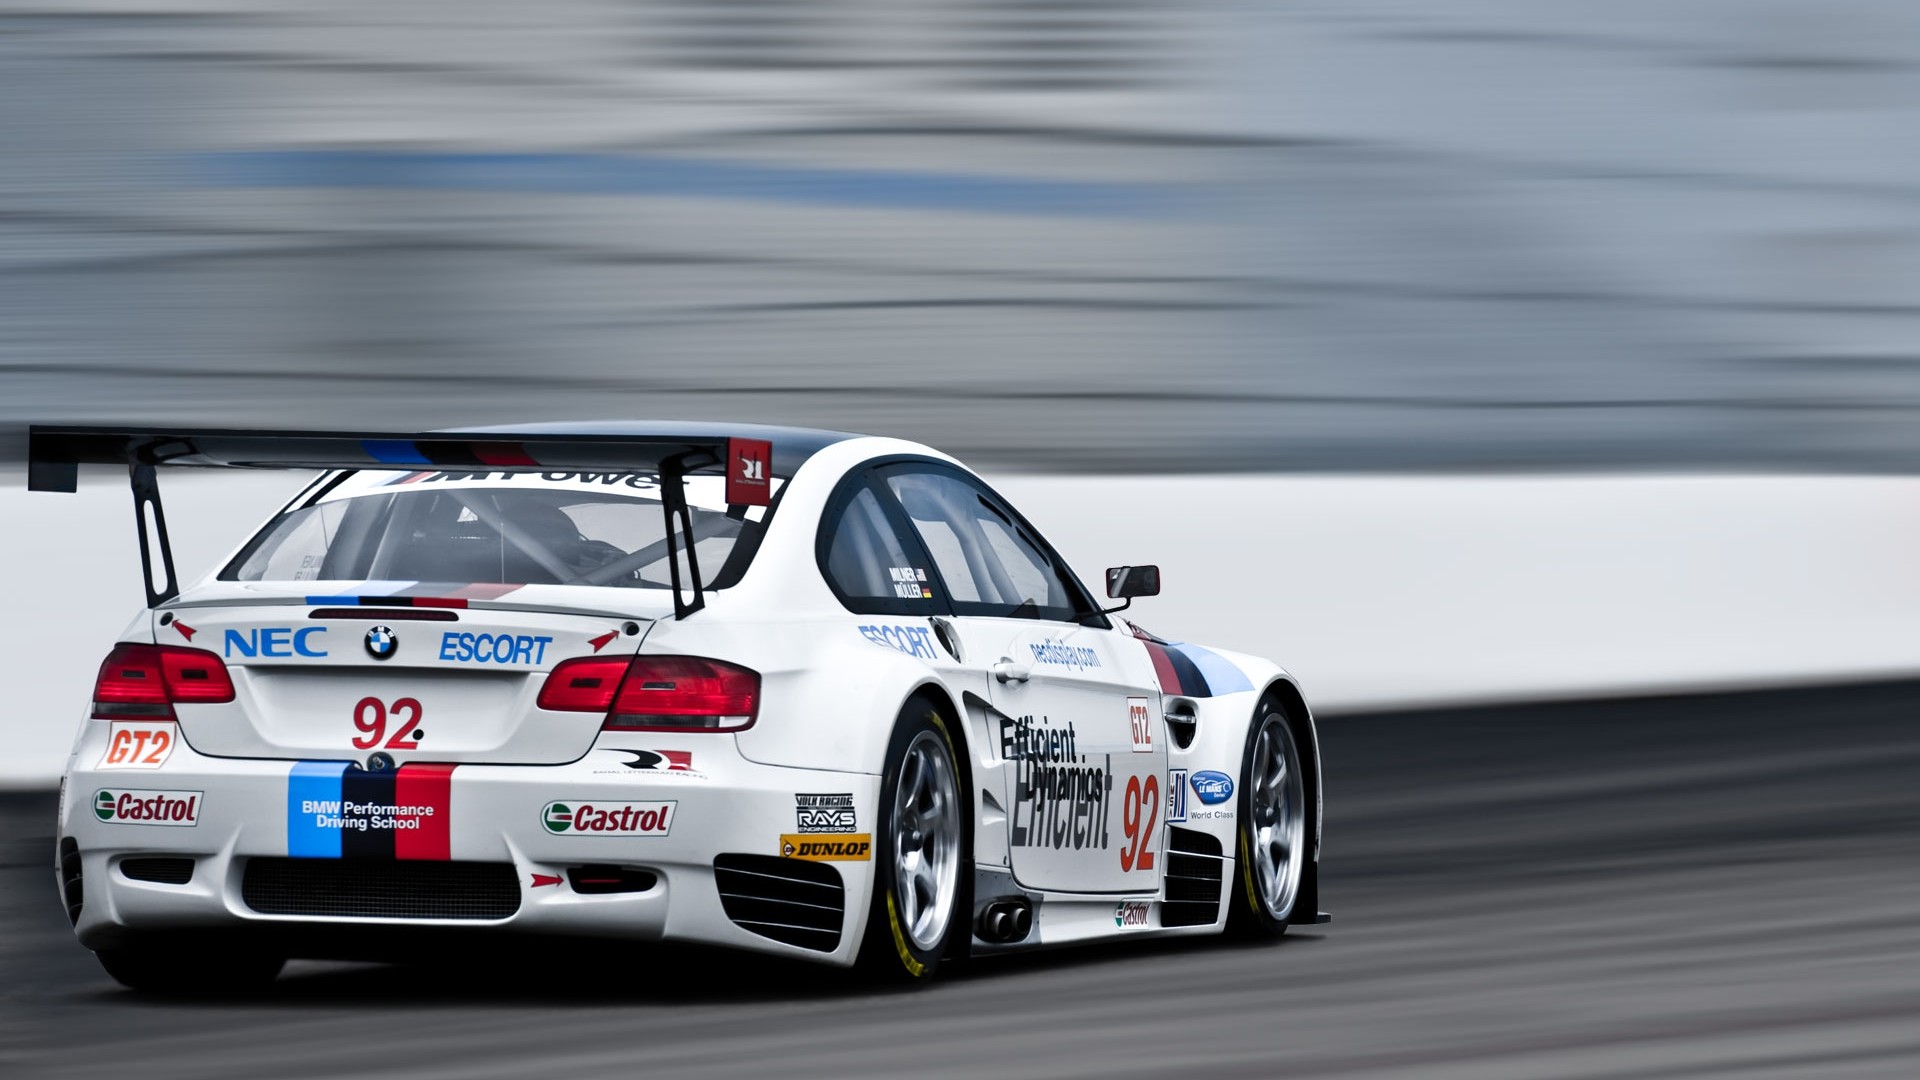 Awesome Bmw M3 Gtr Wallpaper Full HD Pictures